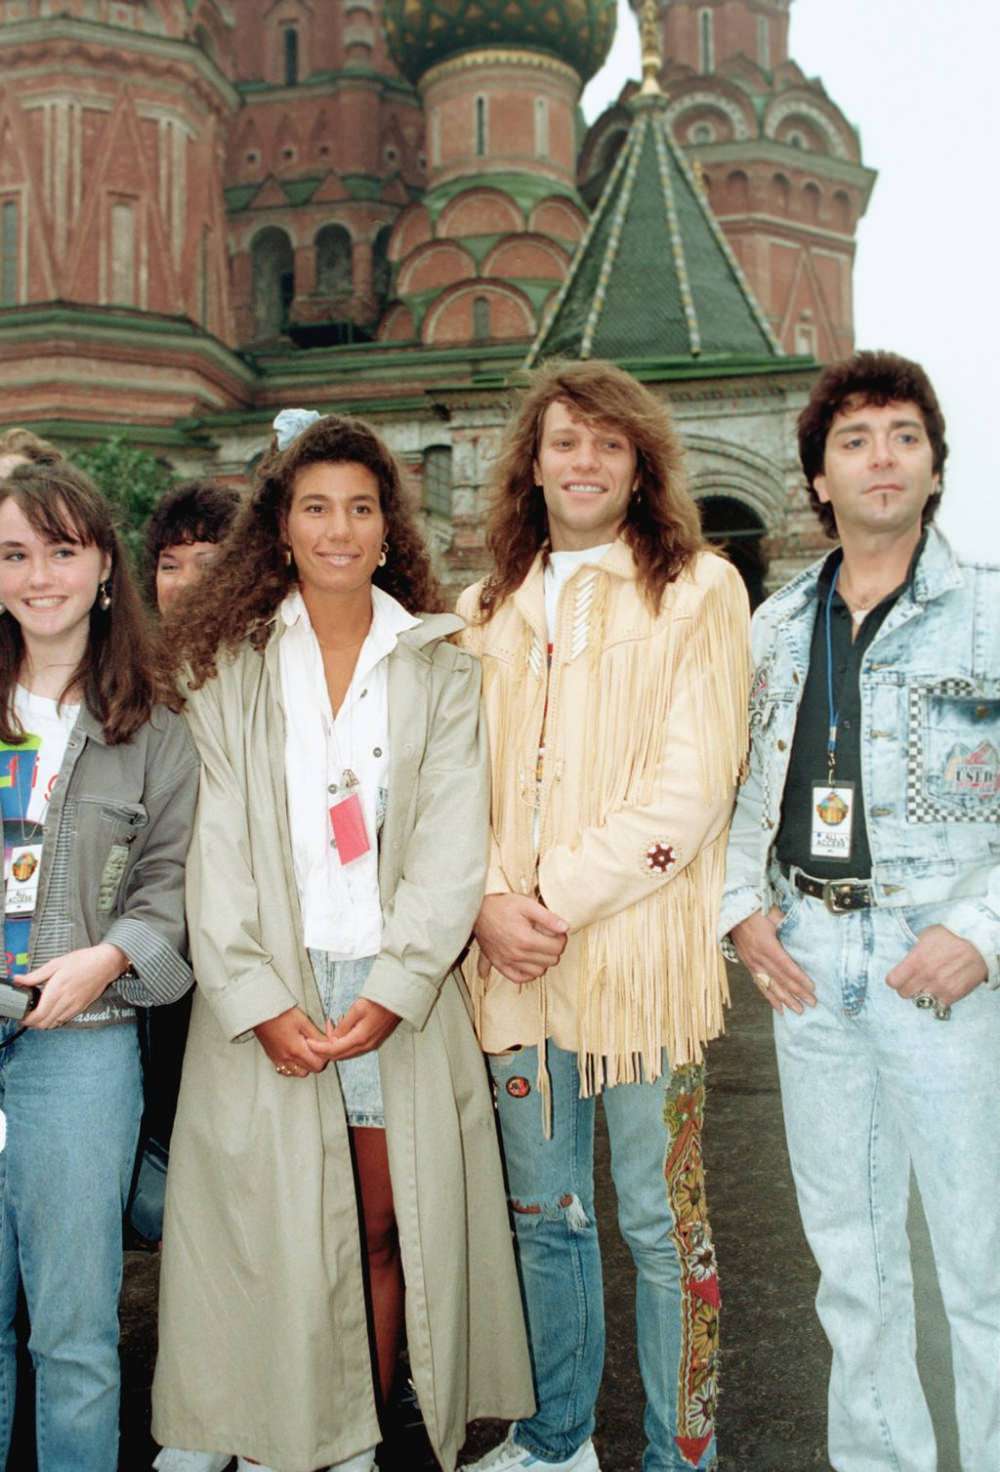 Jon Bon Jovi and other members of the Moscow Music Peace Festival touring party pose at Red Square in front of Saint Basil’s Cathedral in Moscow.